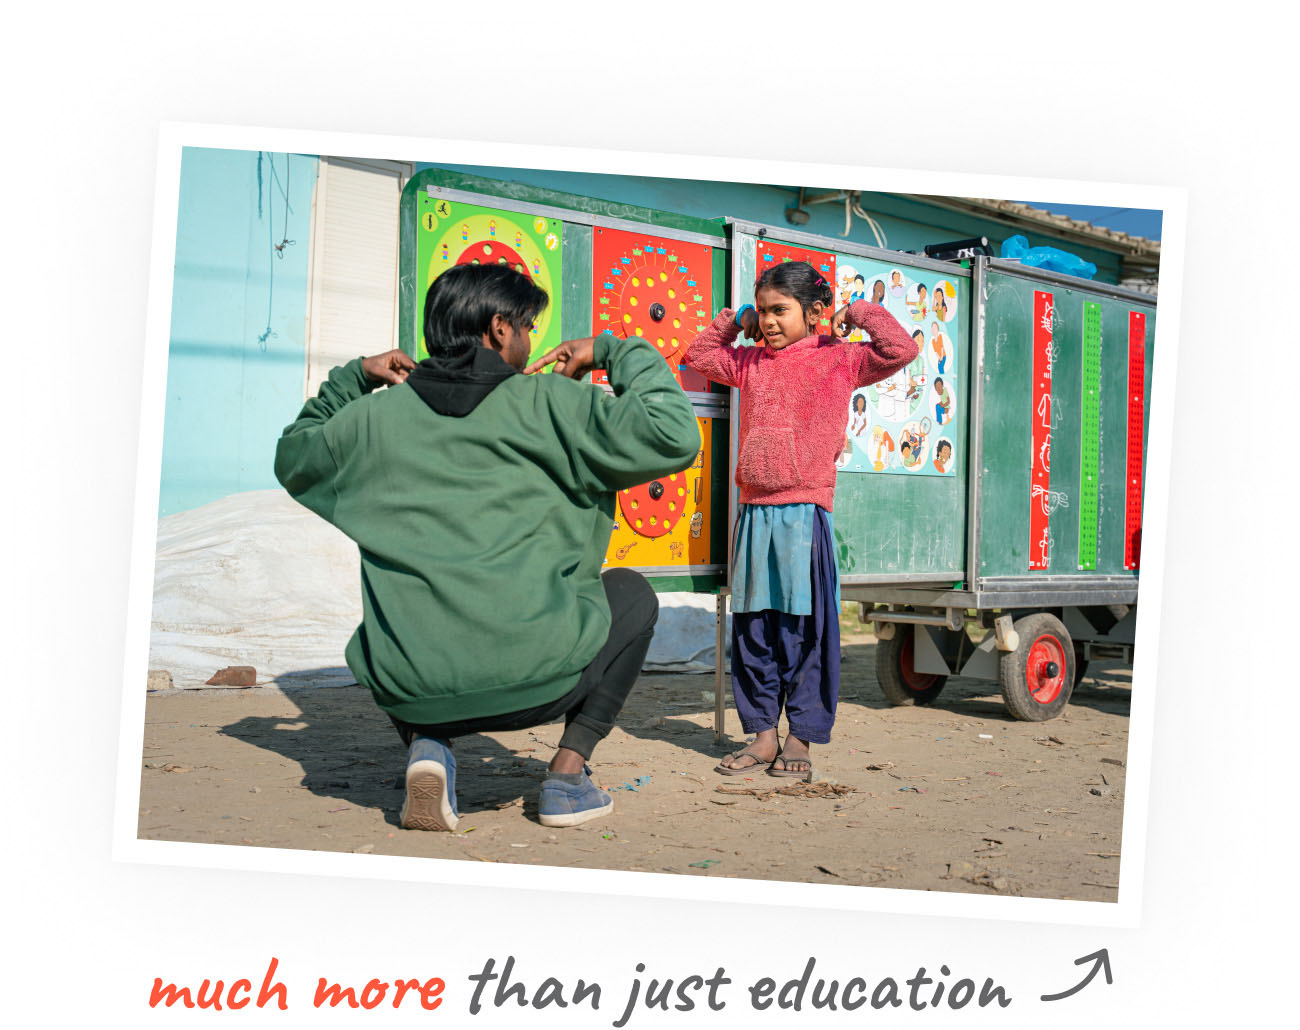 Much more than just education